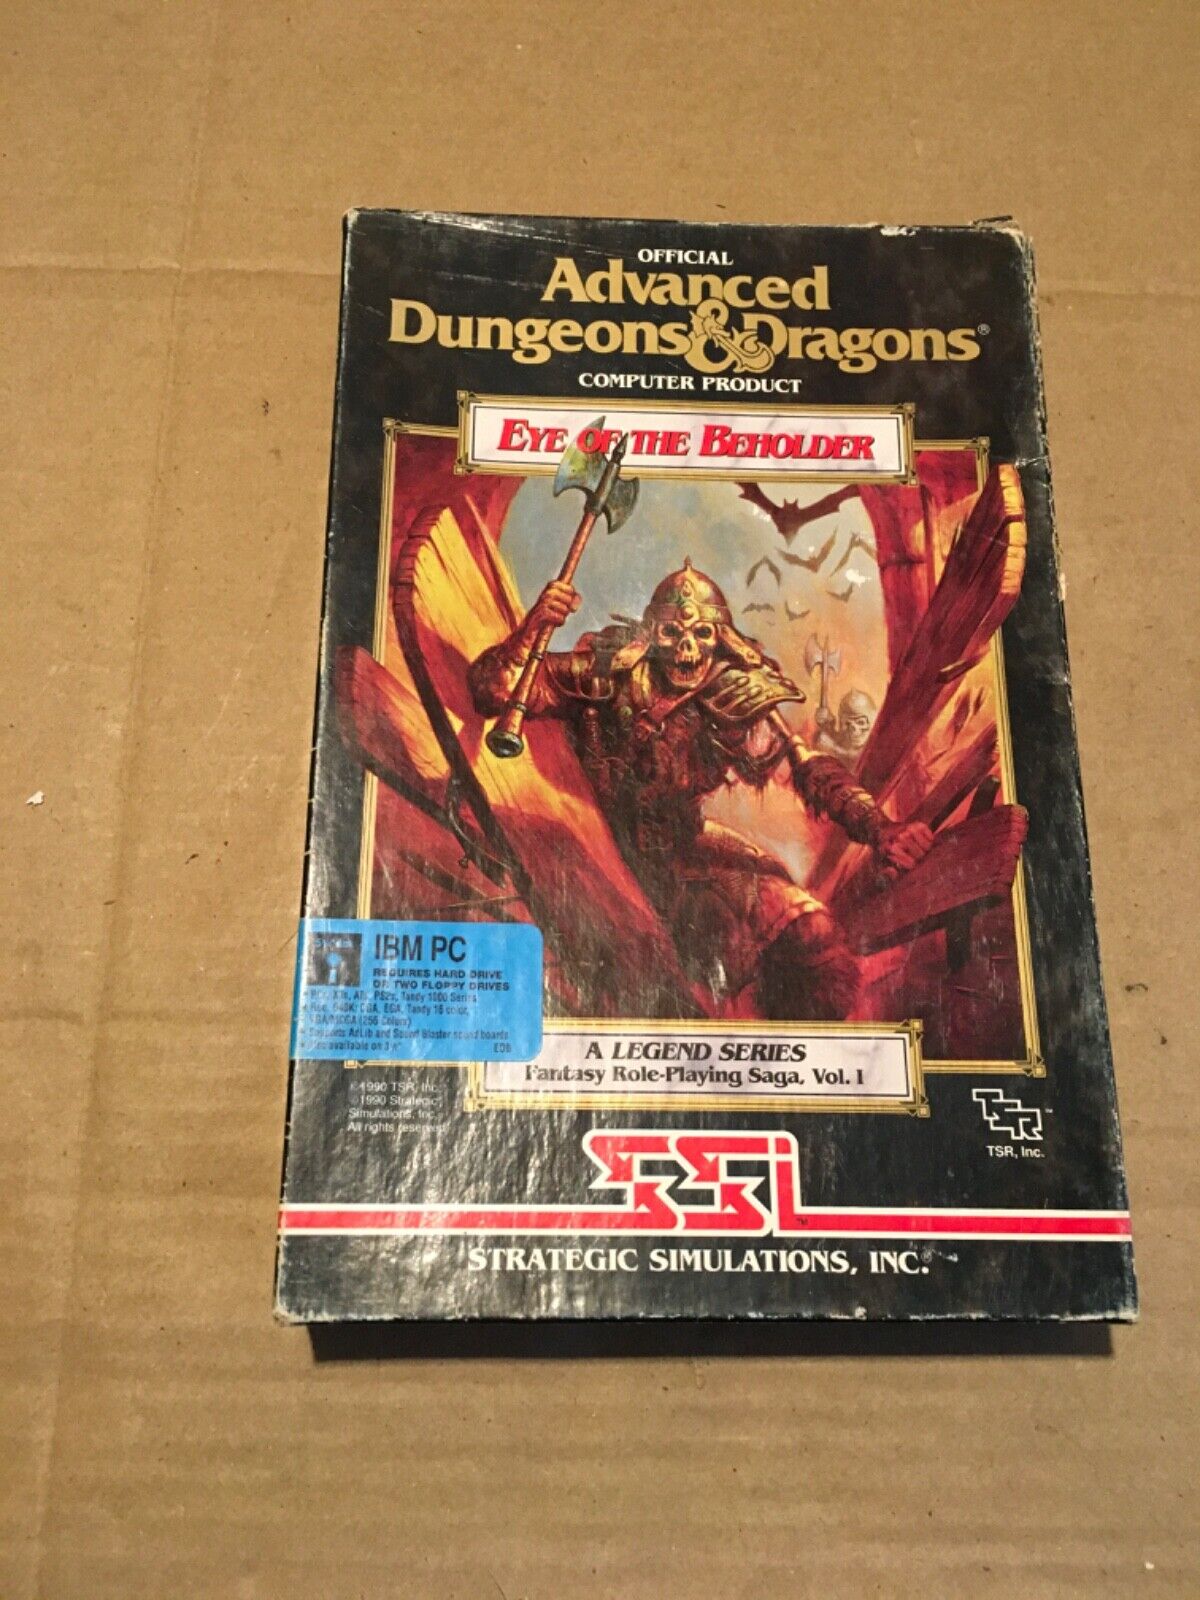 Used Vintage Advanced Dungeons & Dragons “Eye Of The Beholder” 5.25 IBM PC